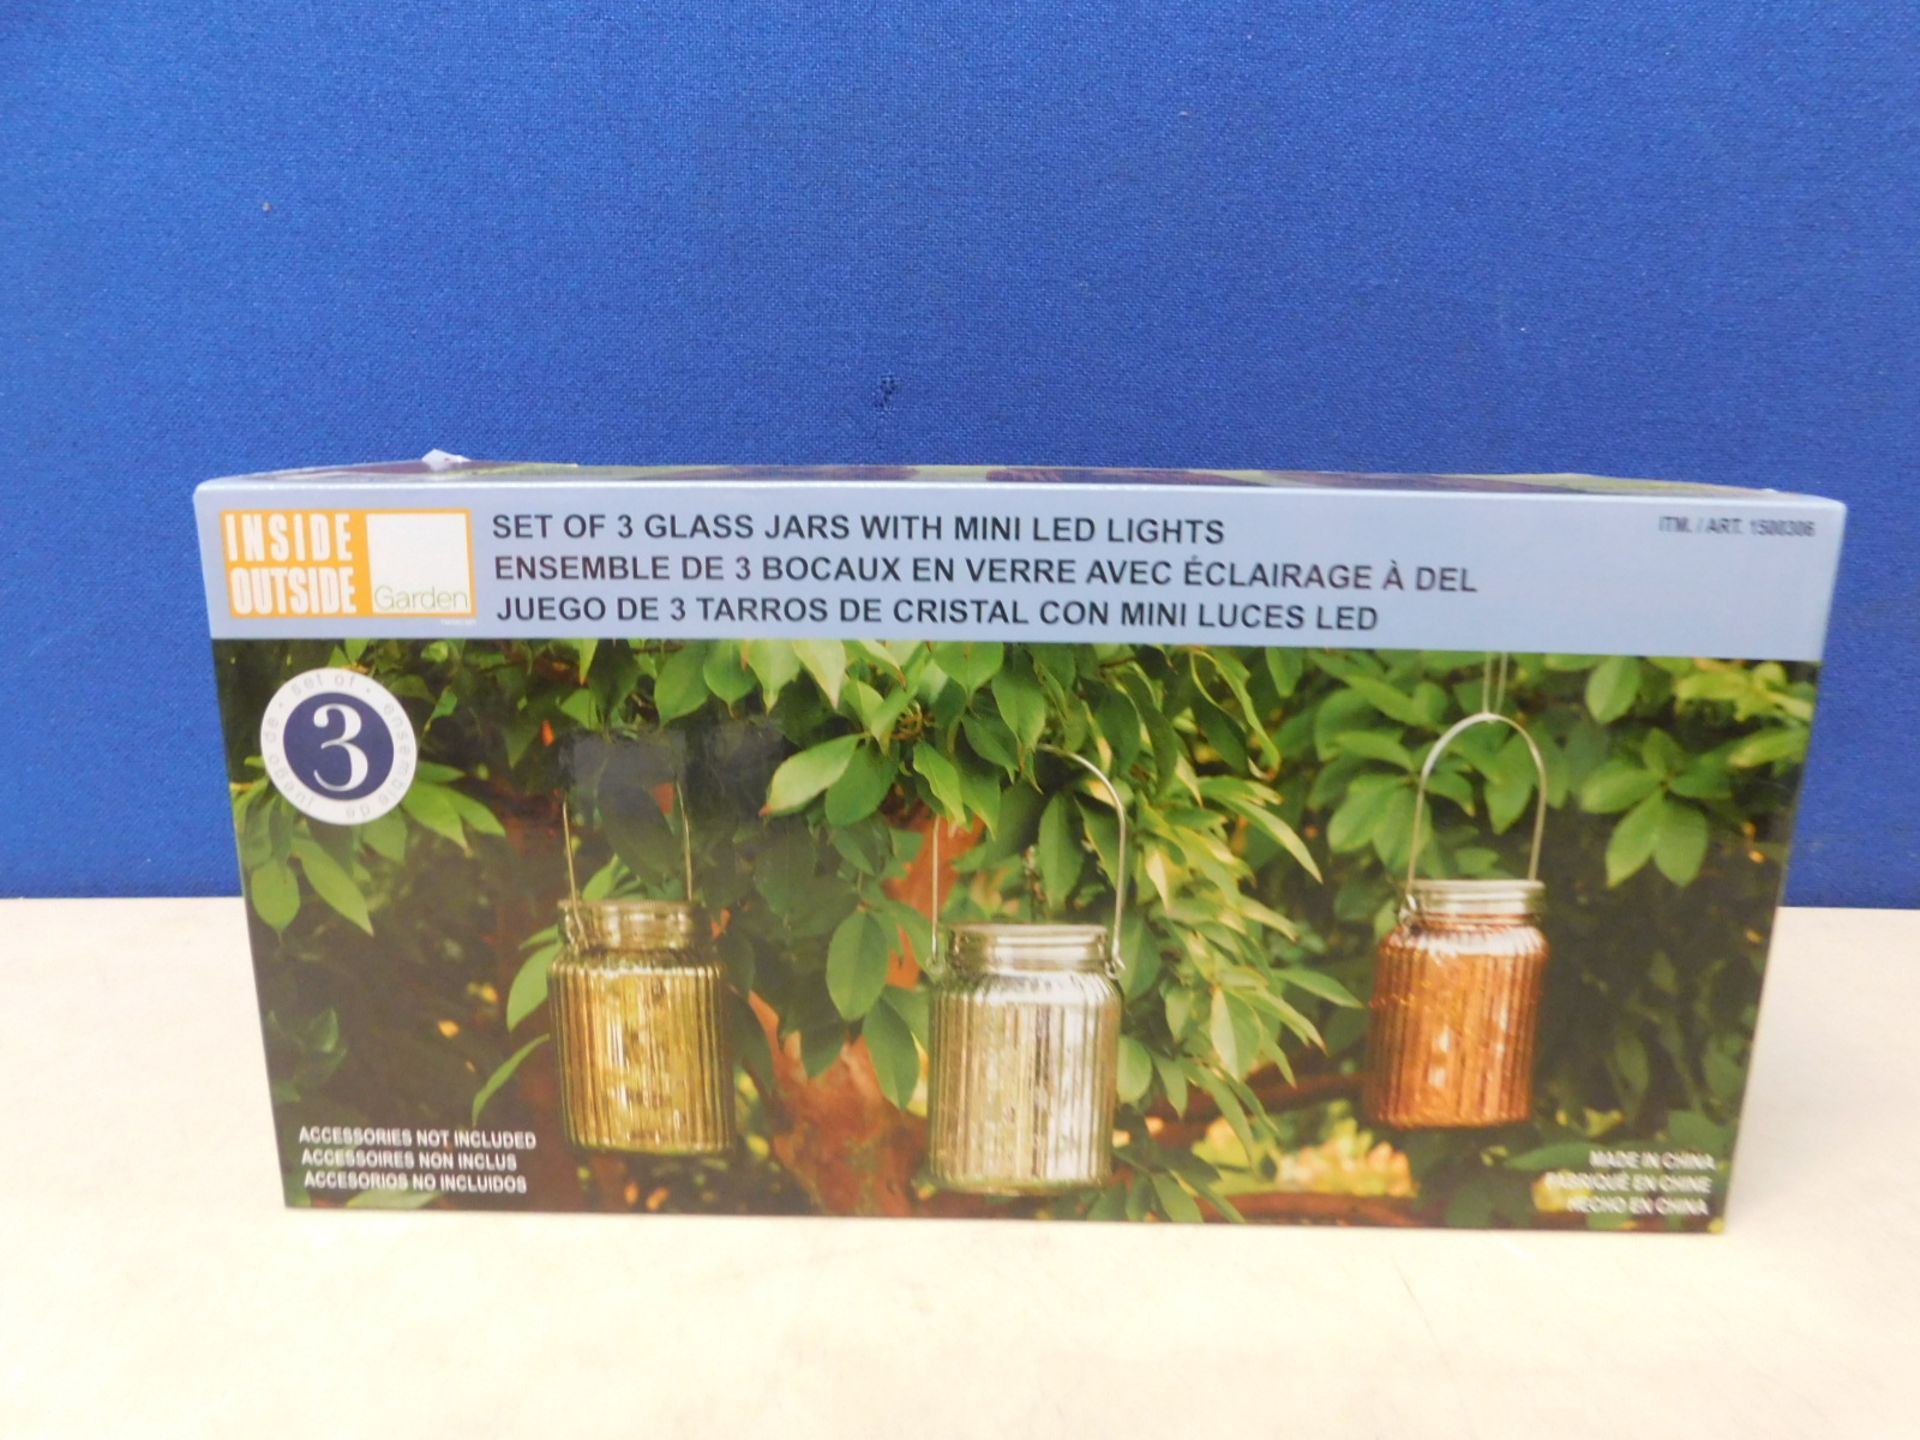 1 BRAND NEW BOXED SET OF 3 COLORED GLASS GARDEN JARS WITH FAIRY LIGHTS RRP Â£39.99